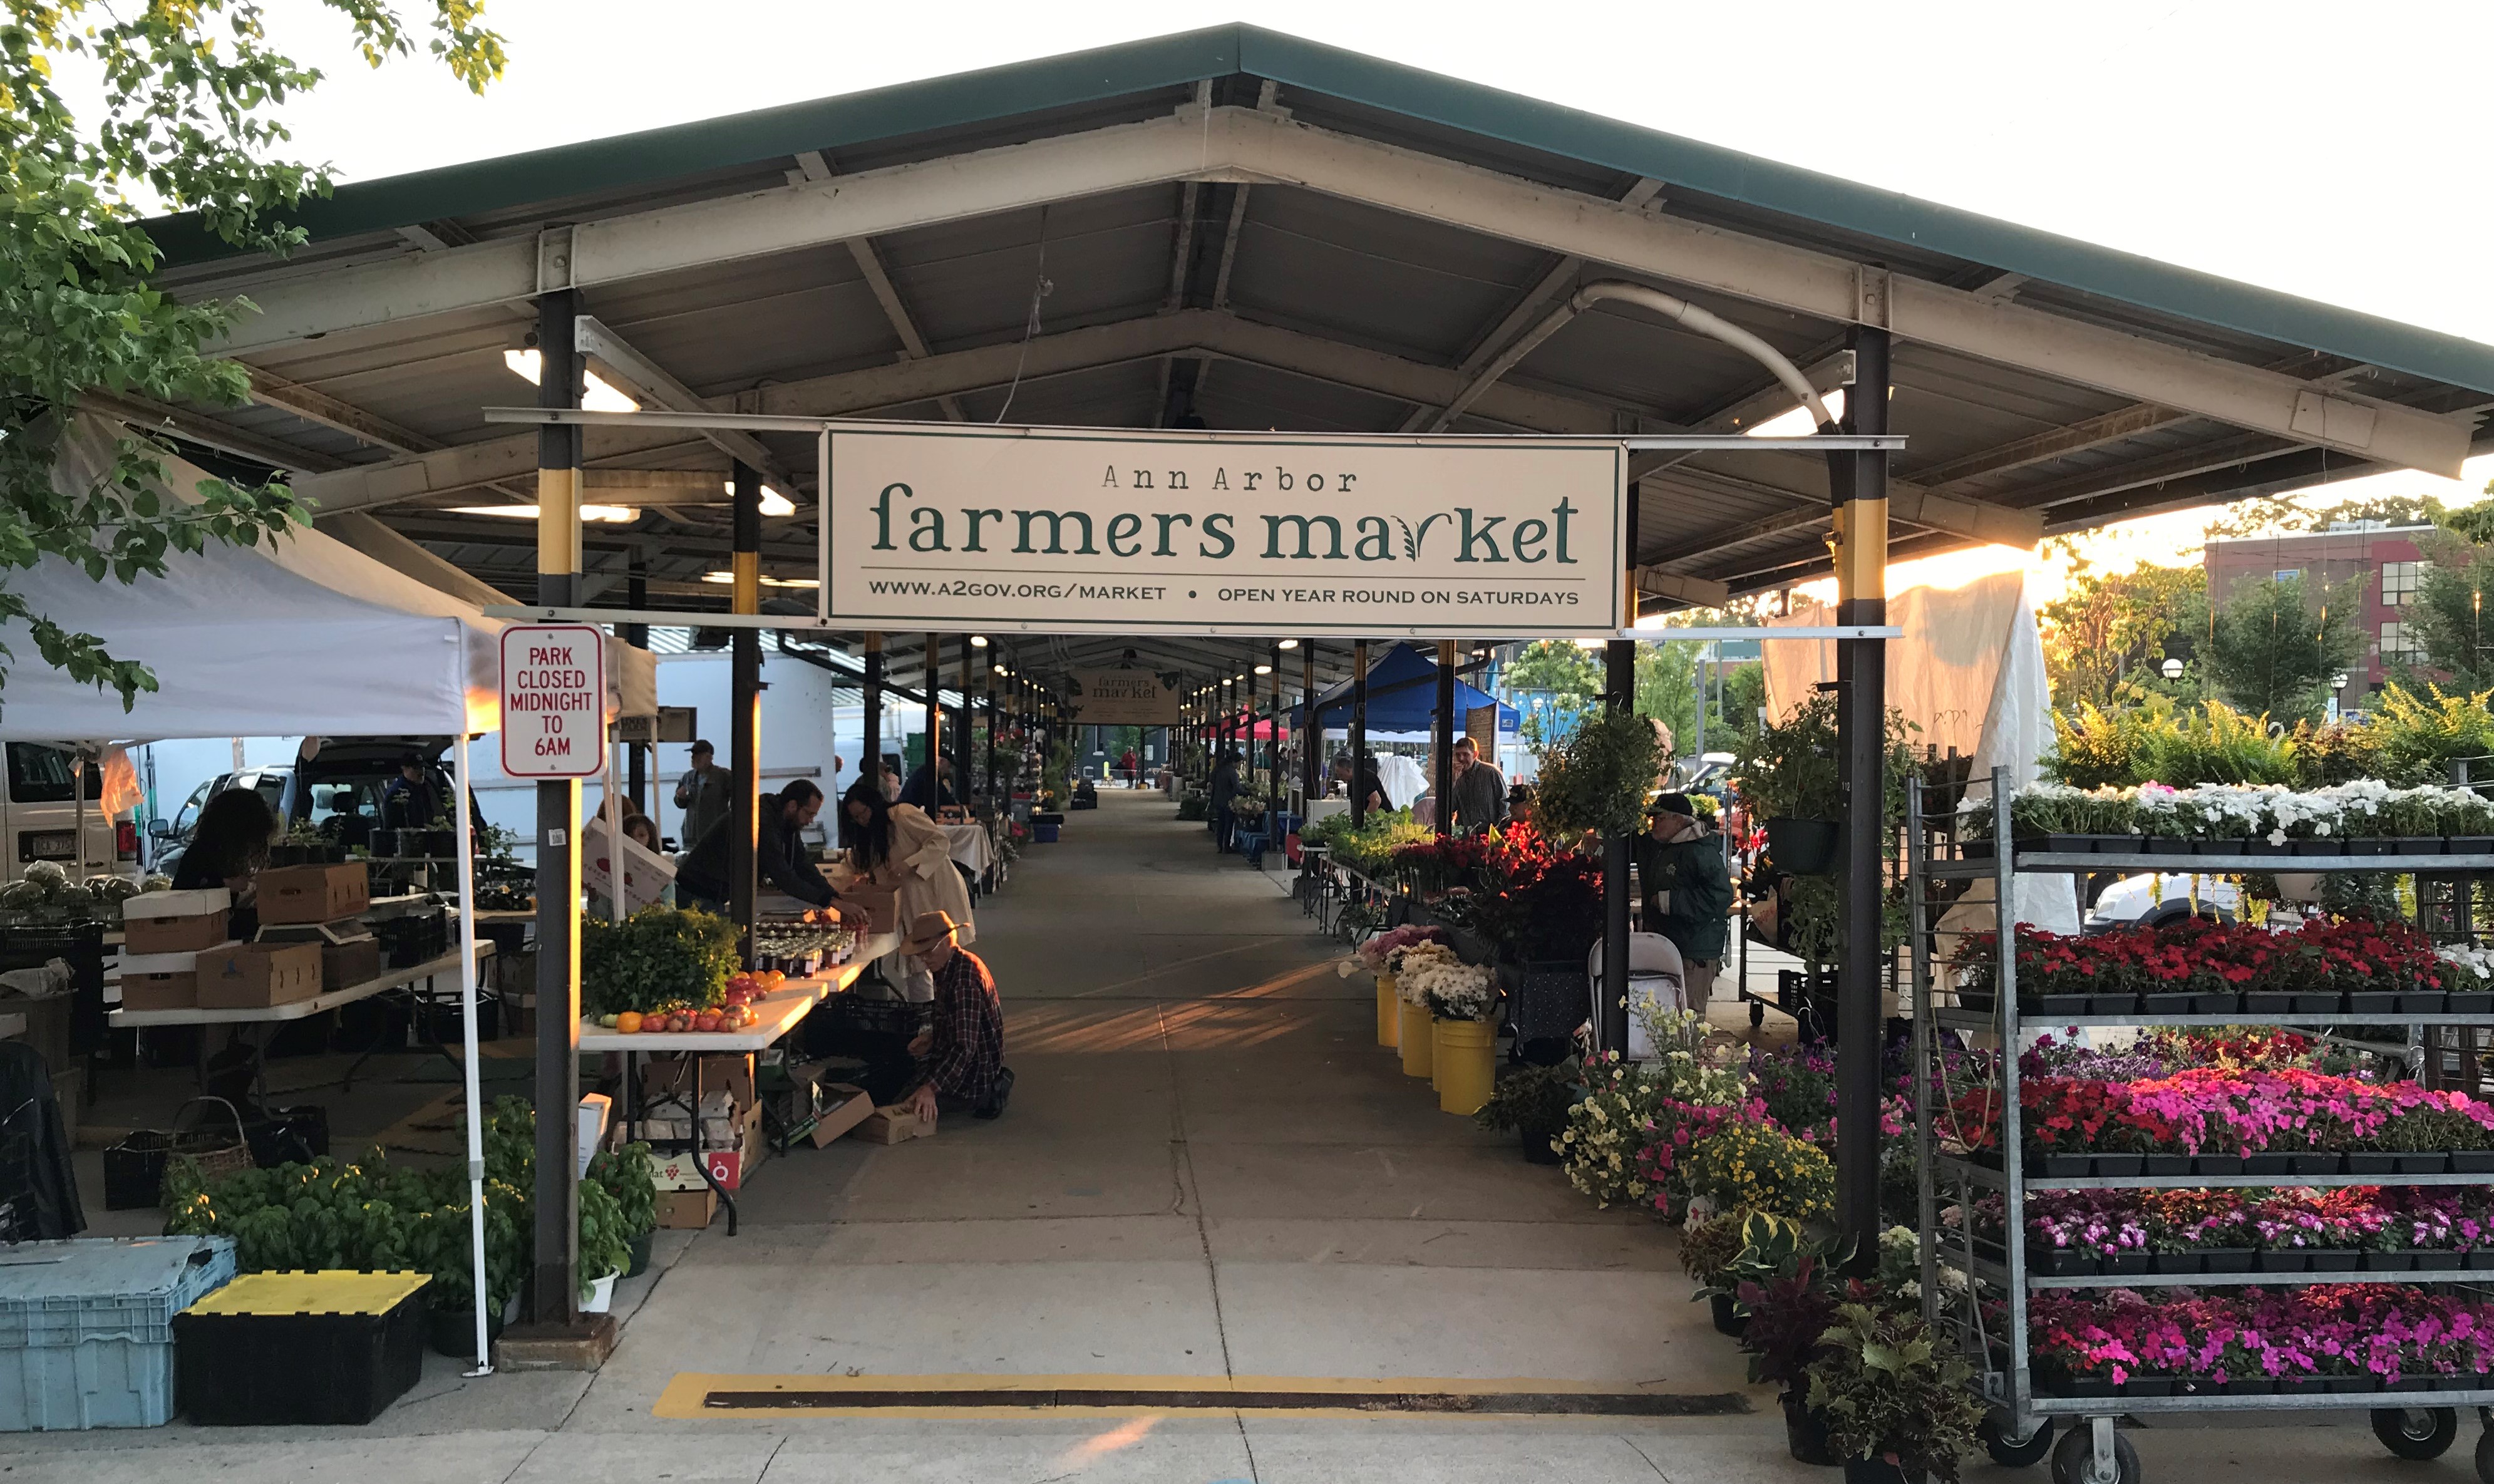 Farmer's Market Tips to Save Money on the Best Stuff